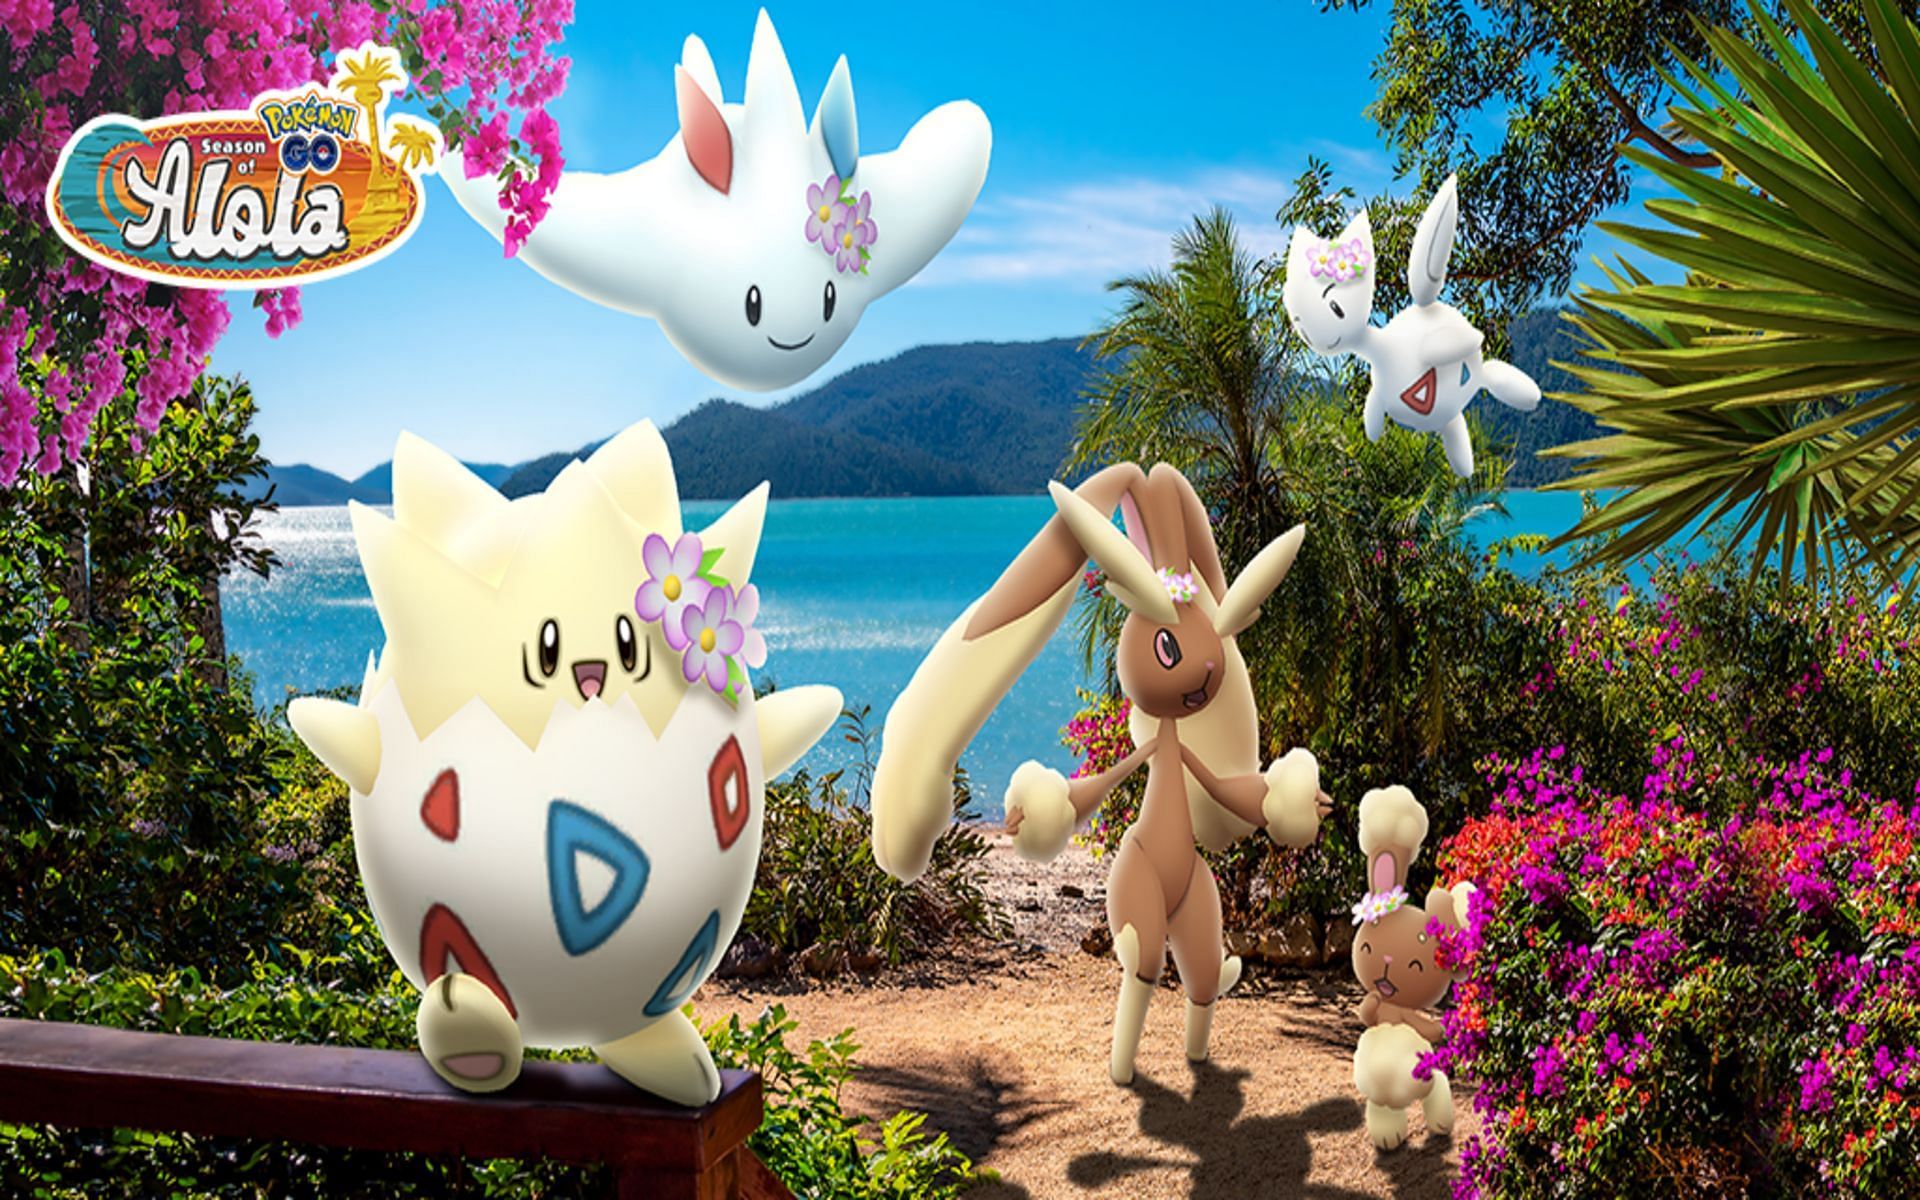 Flower crowns will make a return for this event (Image via Niantic)